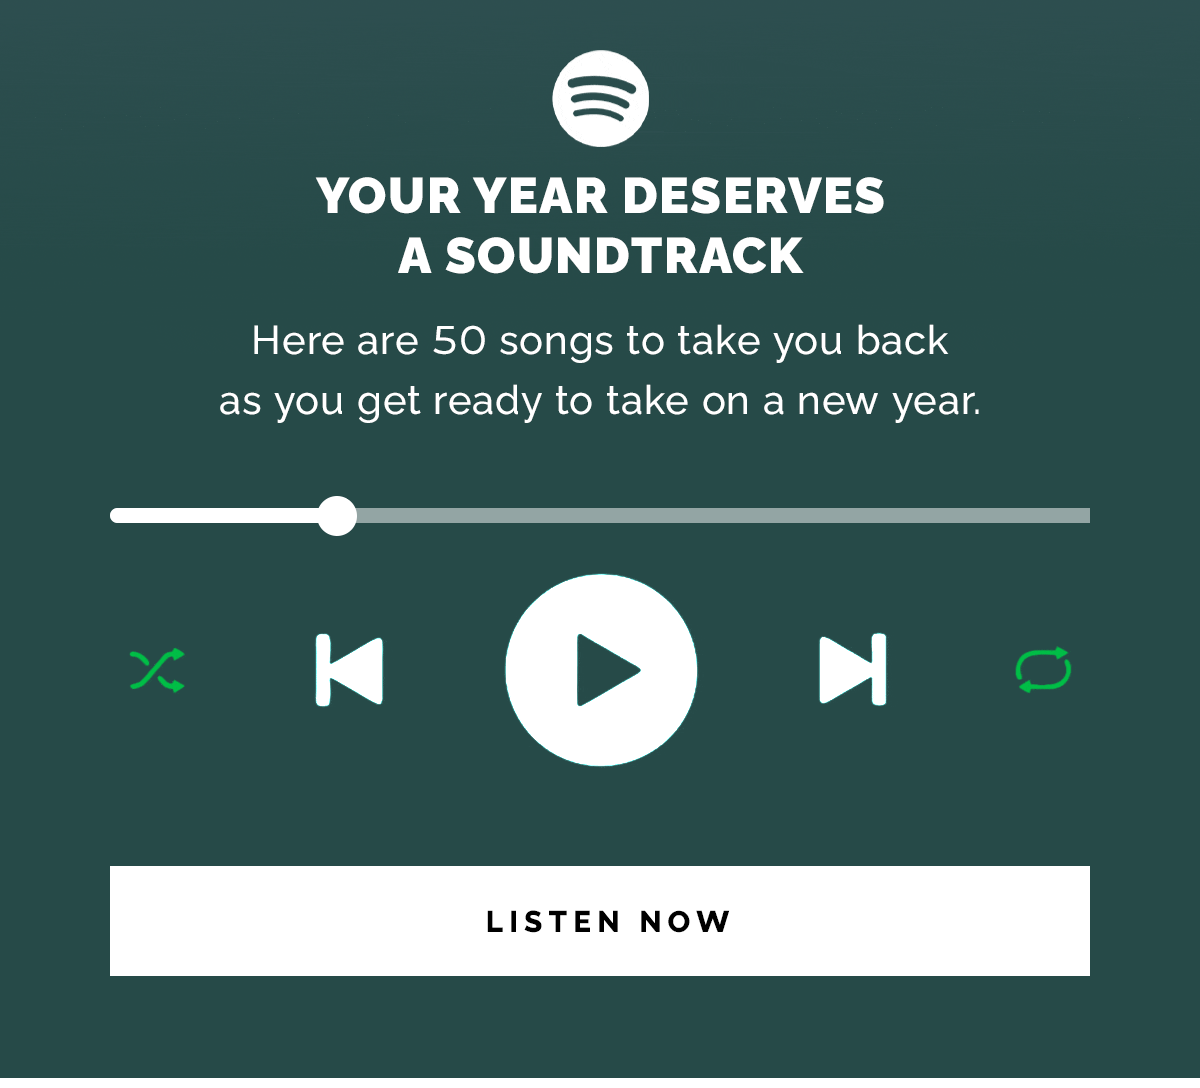 Your year deserves a soundtrack